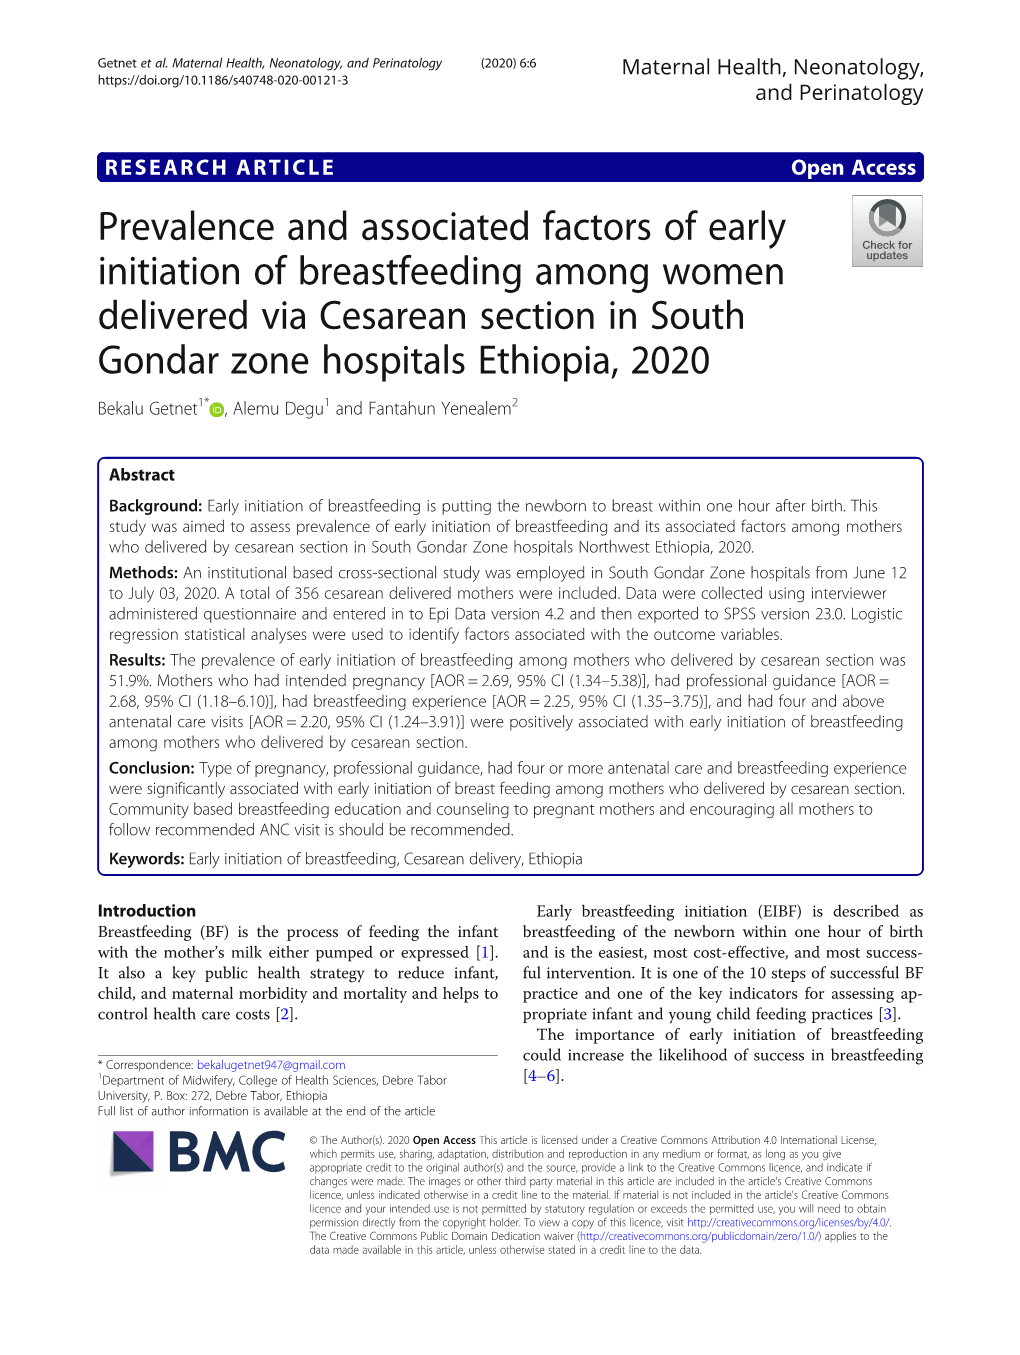 Prevalence and Associated Factors of Early Initiation of Breastfeeding